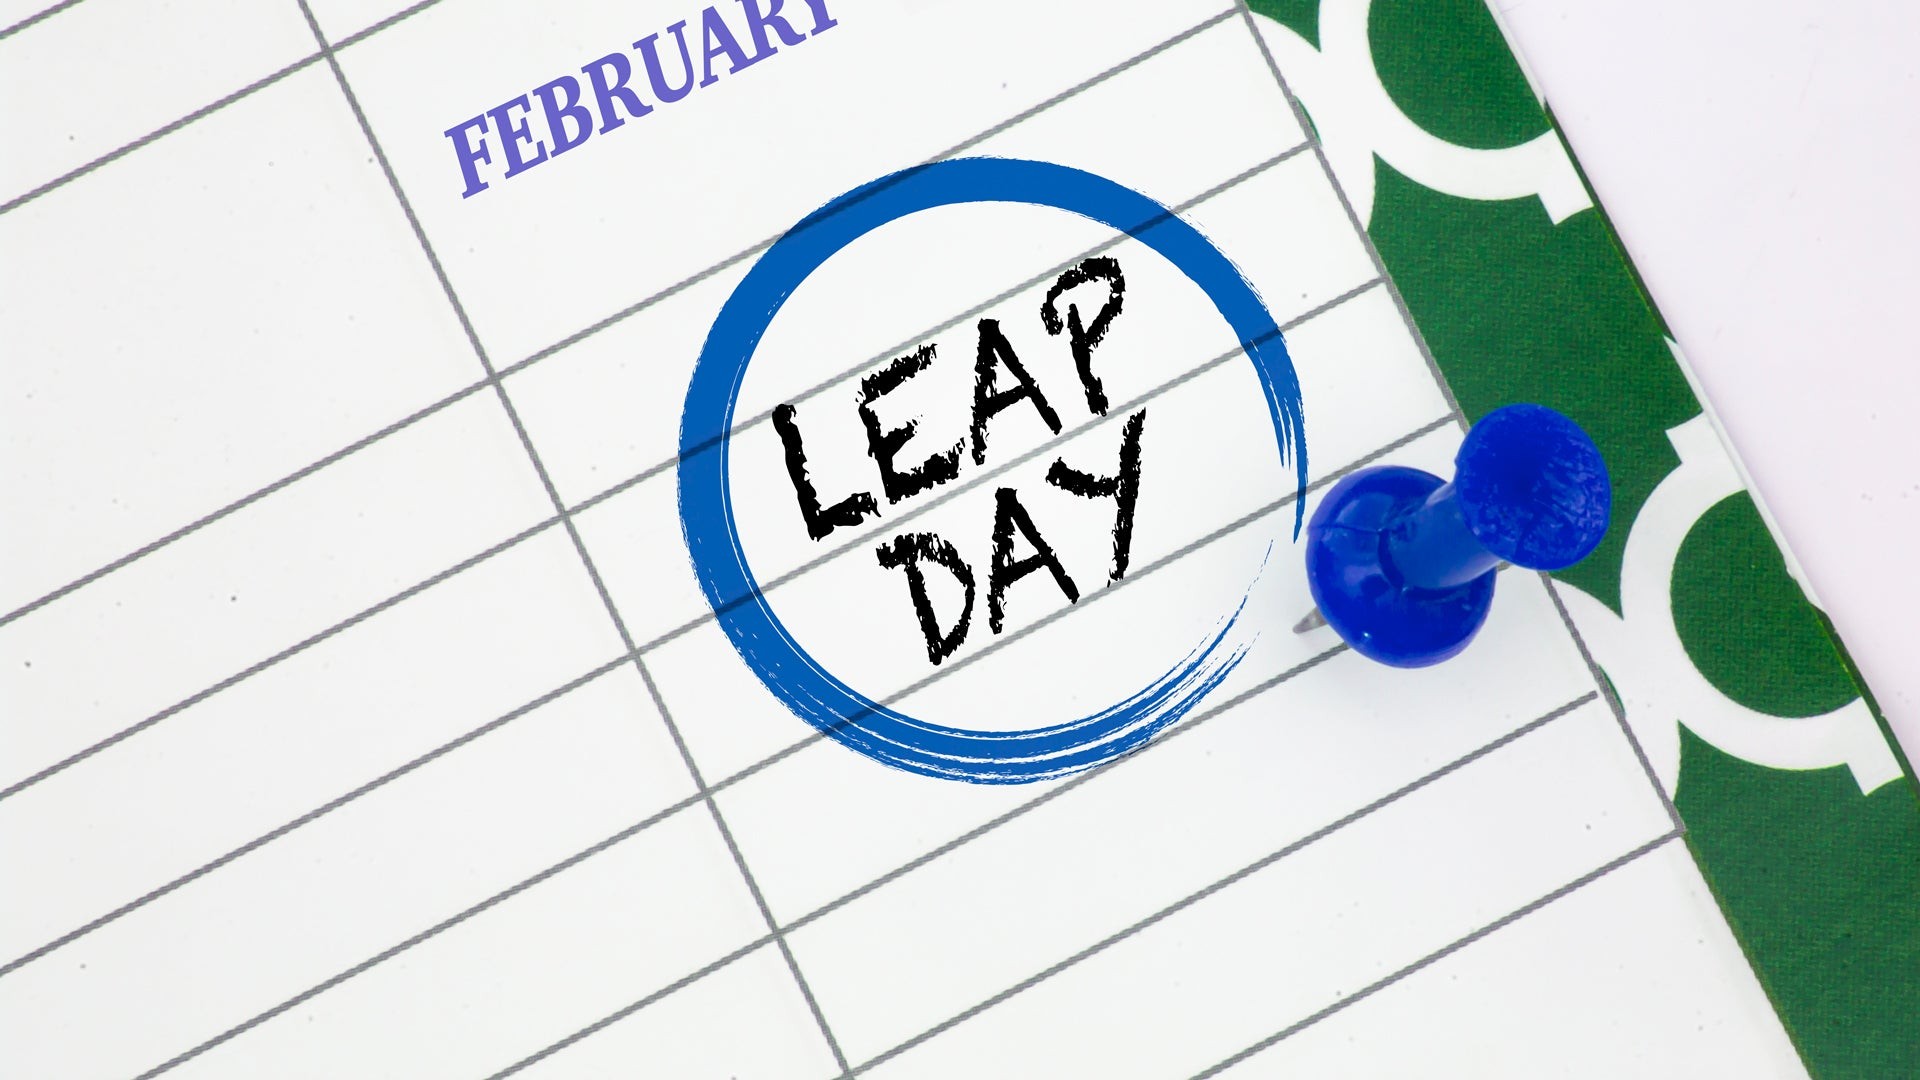 How Many Weeks Are There in a Leap Year Month?